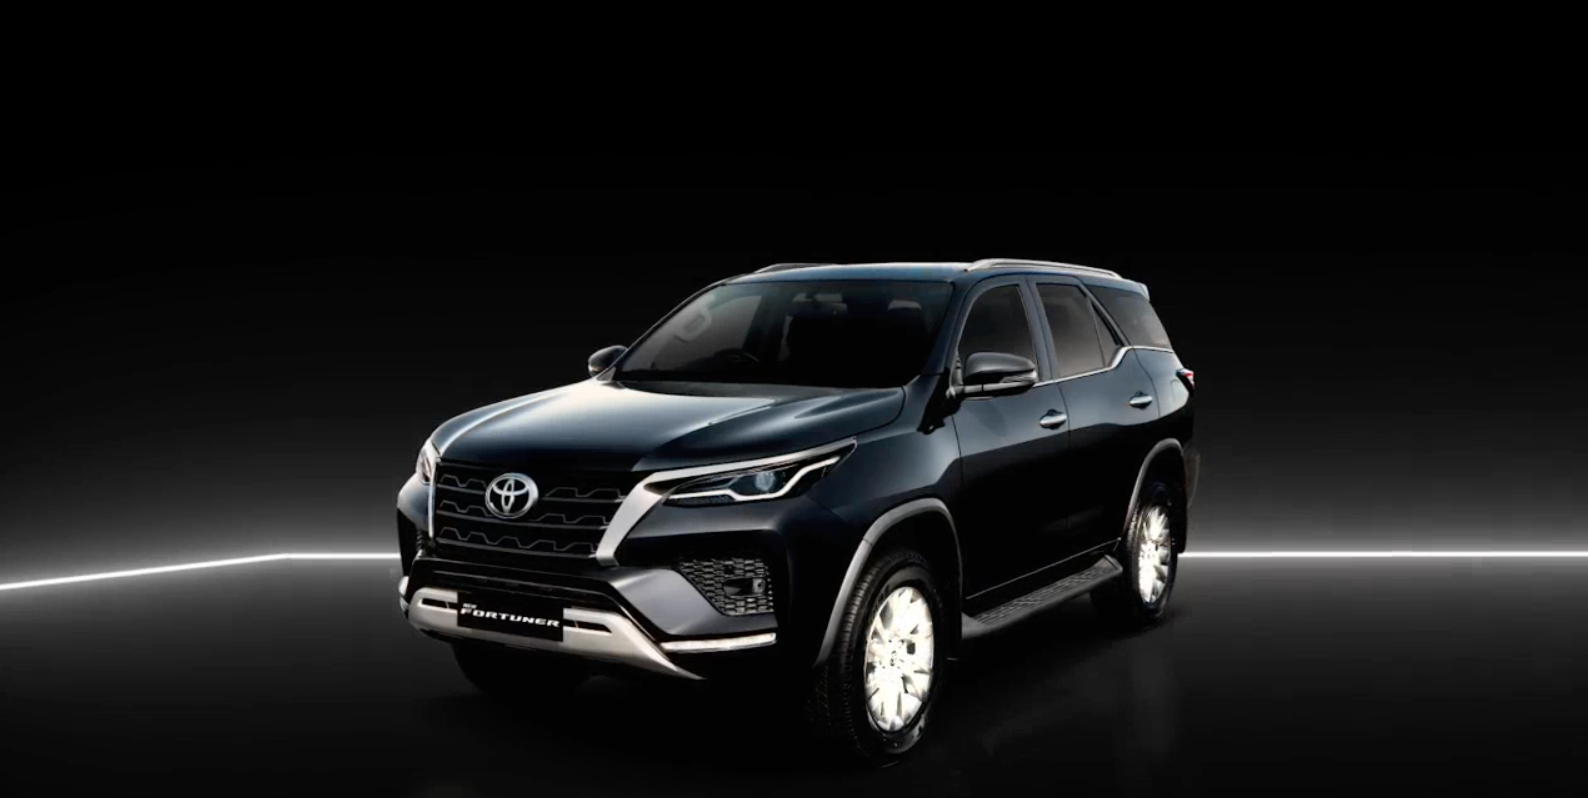 <p>Cosmetic updates on the Toyota new Fortuner include a larger grille, reshaped bumpers, redesigned skid plate, LED lights at either end and a new wheel design.</p>